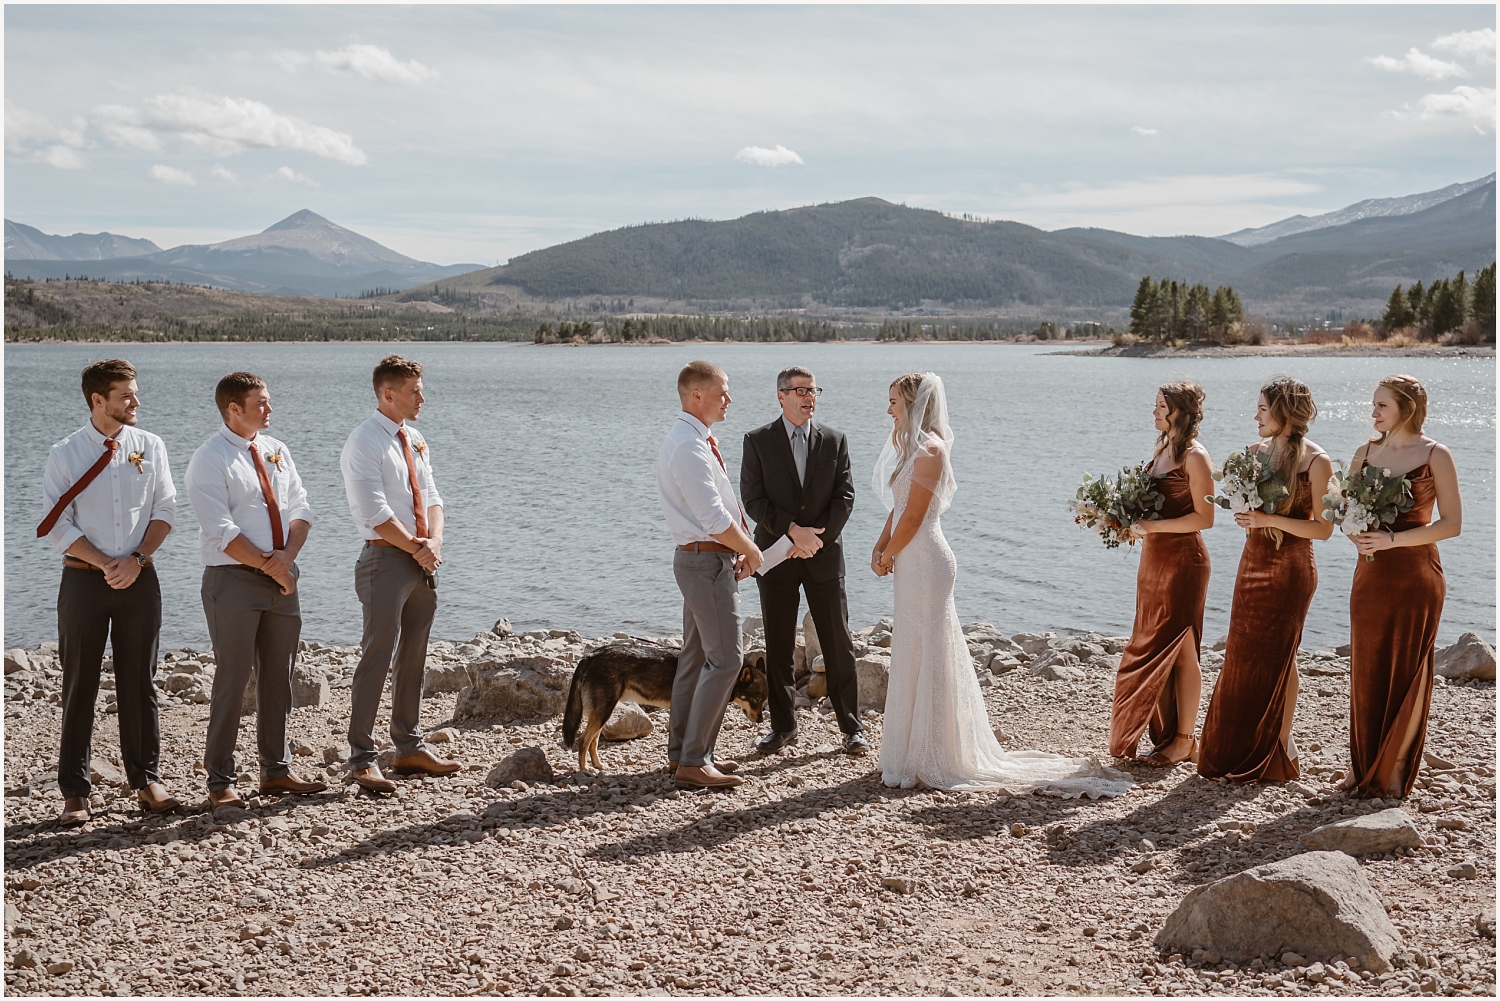 Bride and groom elope with family and friends in colorado